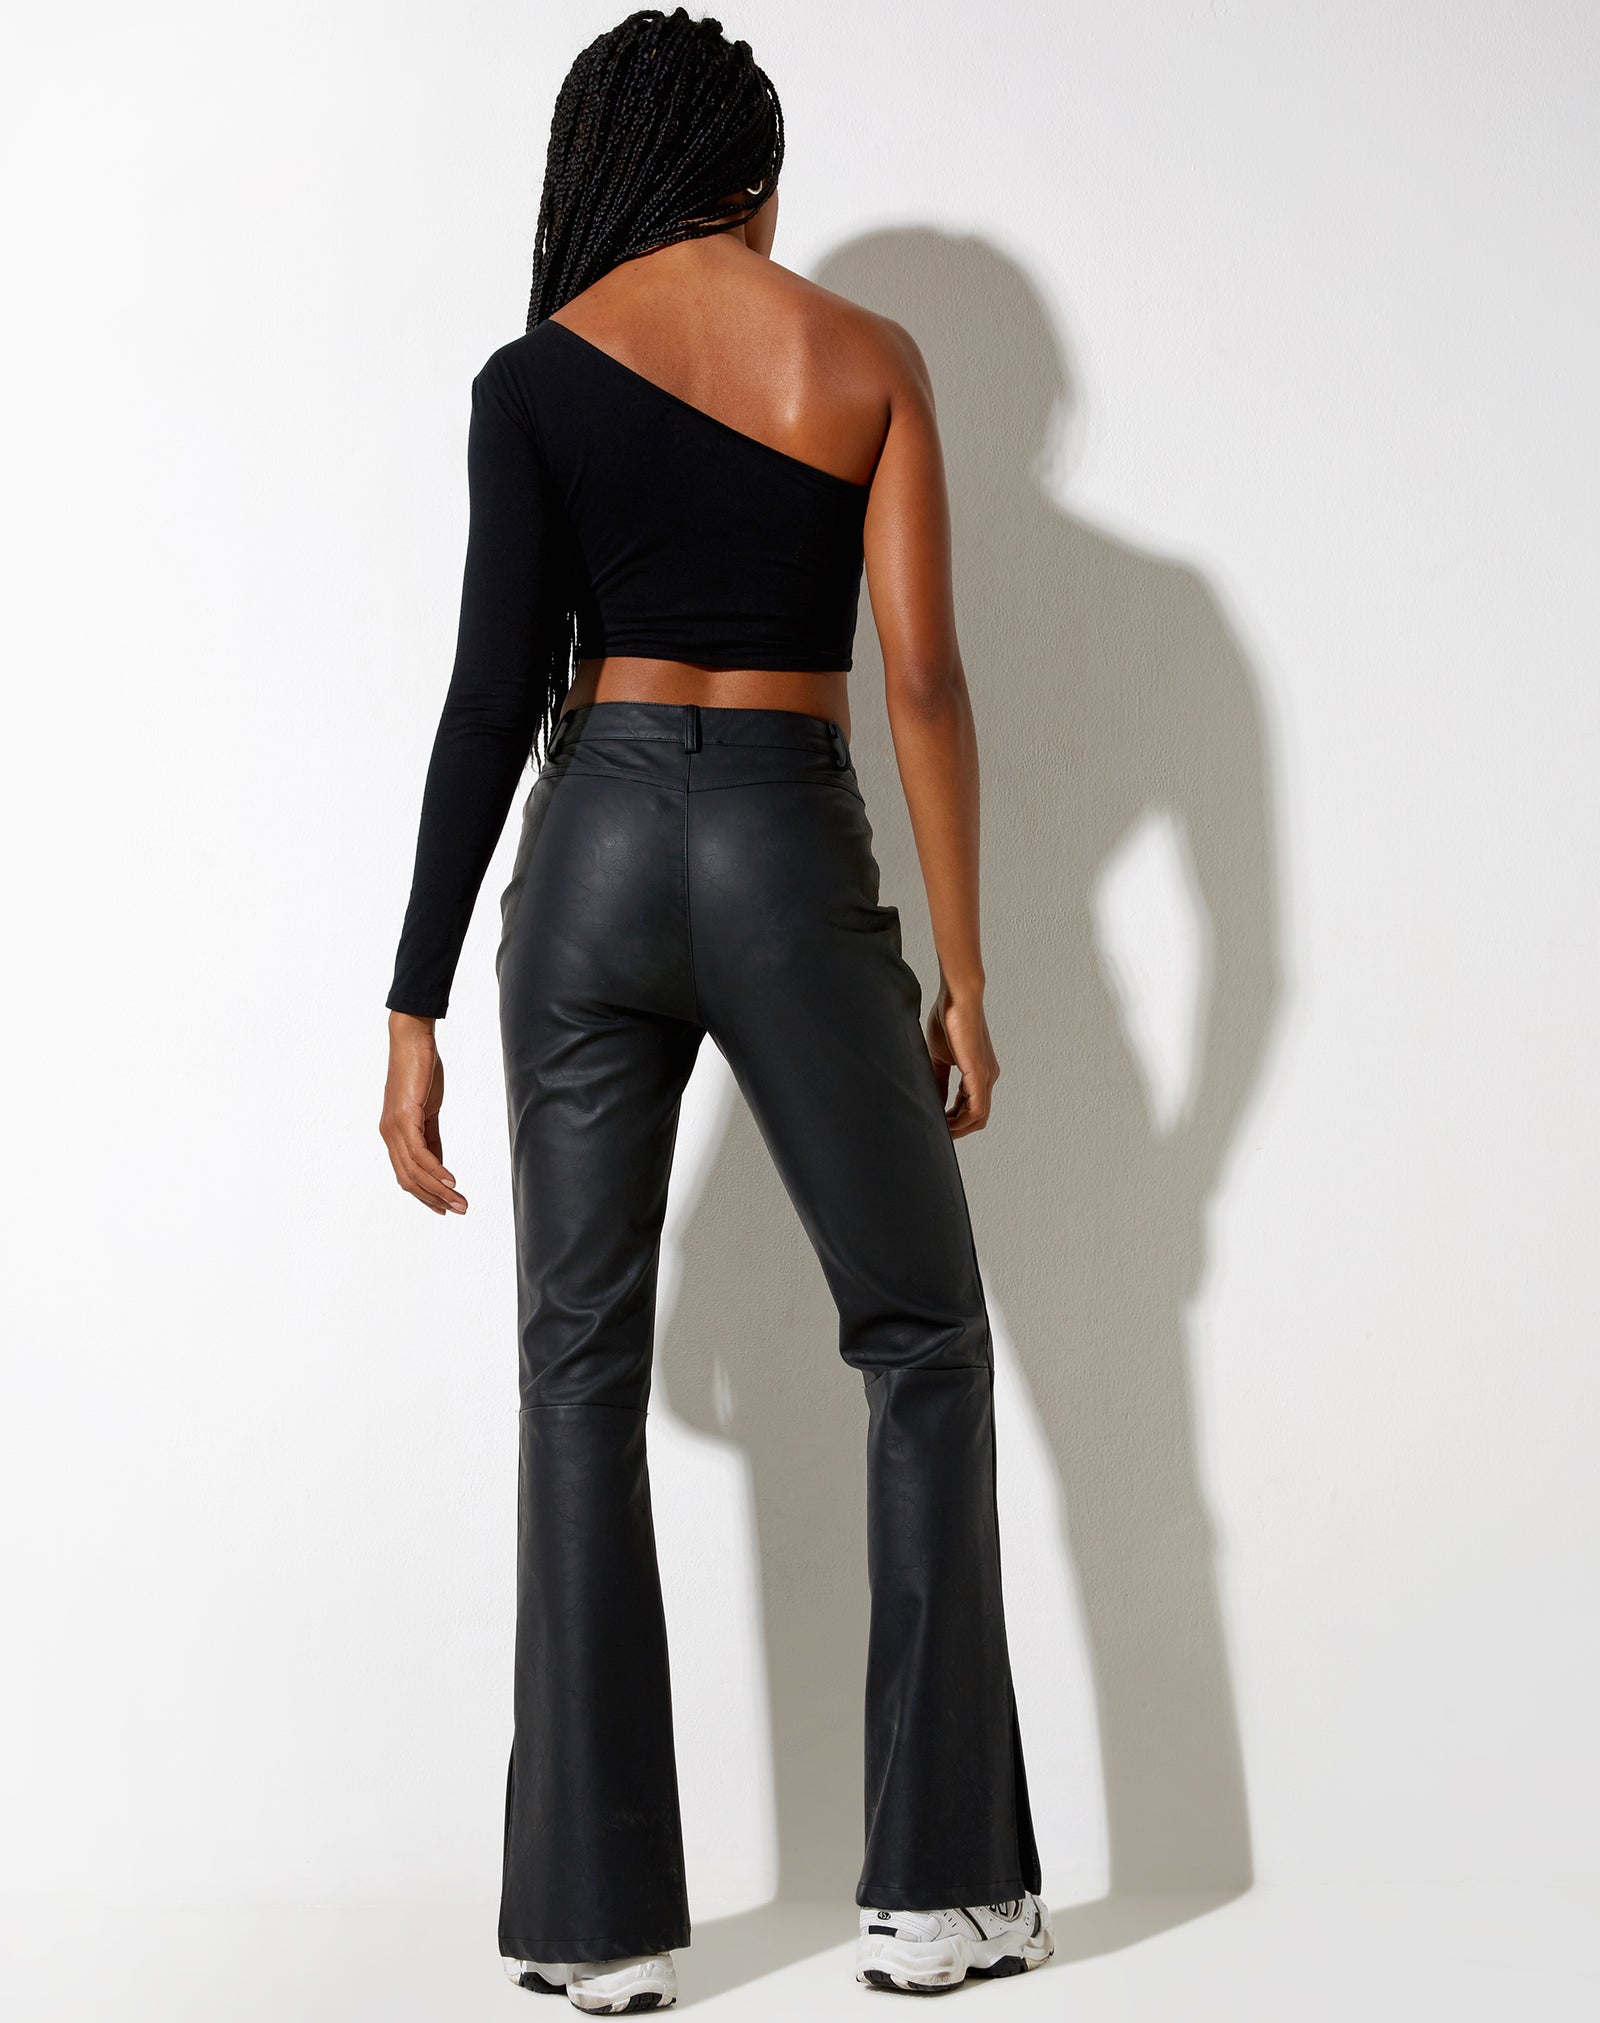 Boohoo High Waisted Matte Leather Look Skinny Trousers  Black  verycouk